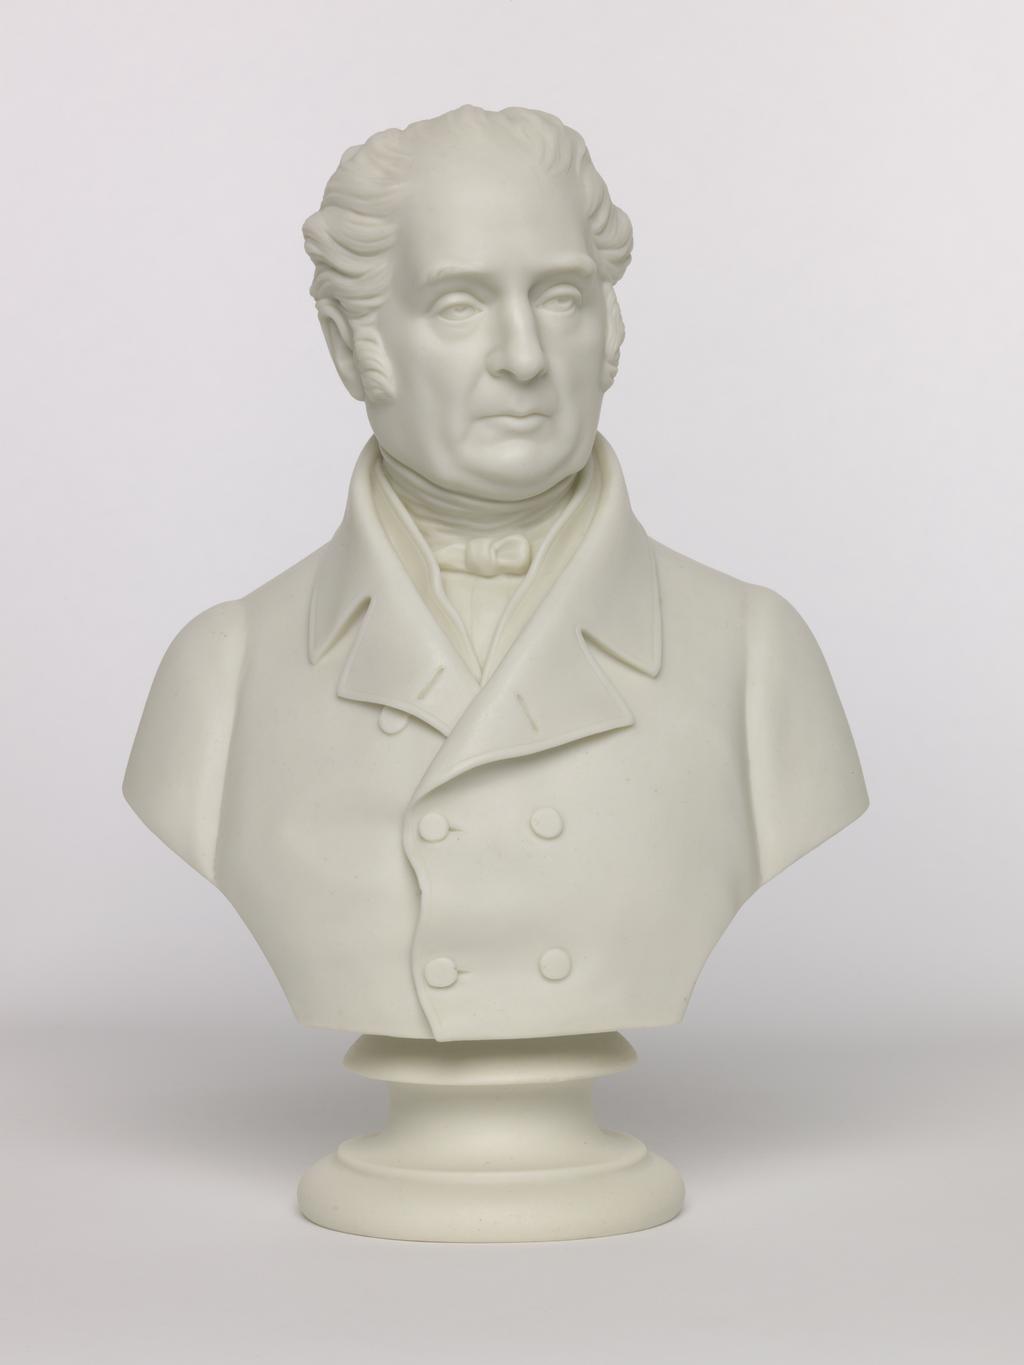 An image of Bust. Unknown man. Copeland, England, Staffordshire, Stoke-on-Trent. Westmacott, James Sherwood, sculptor (British). Inscriptions: maker's name; reverse of bust; marked; J Sherwood Westmacott Sc 1852 COPELAND. Maker's name; underneath base; marked; COPELAND. Parian (porcelain), slip-cast, height, 26.7 cm, length, 18.3 cm, width, 10 cm, length, base, 9.2 cm, 1852 Acquisition Credit: Accepted by H. M. Government in lieu of Inheritance Tax from the estate of G. D. V. Glynn, and allocated to the Fitzwilliam Museum.